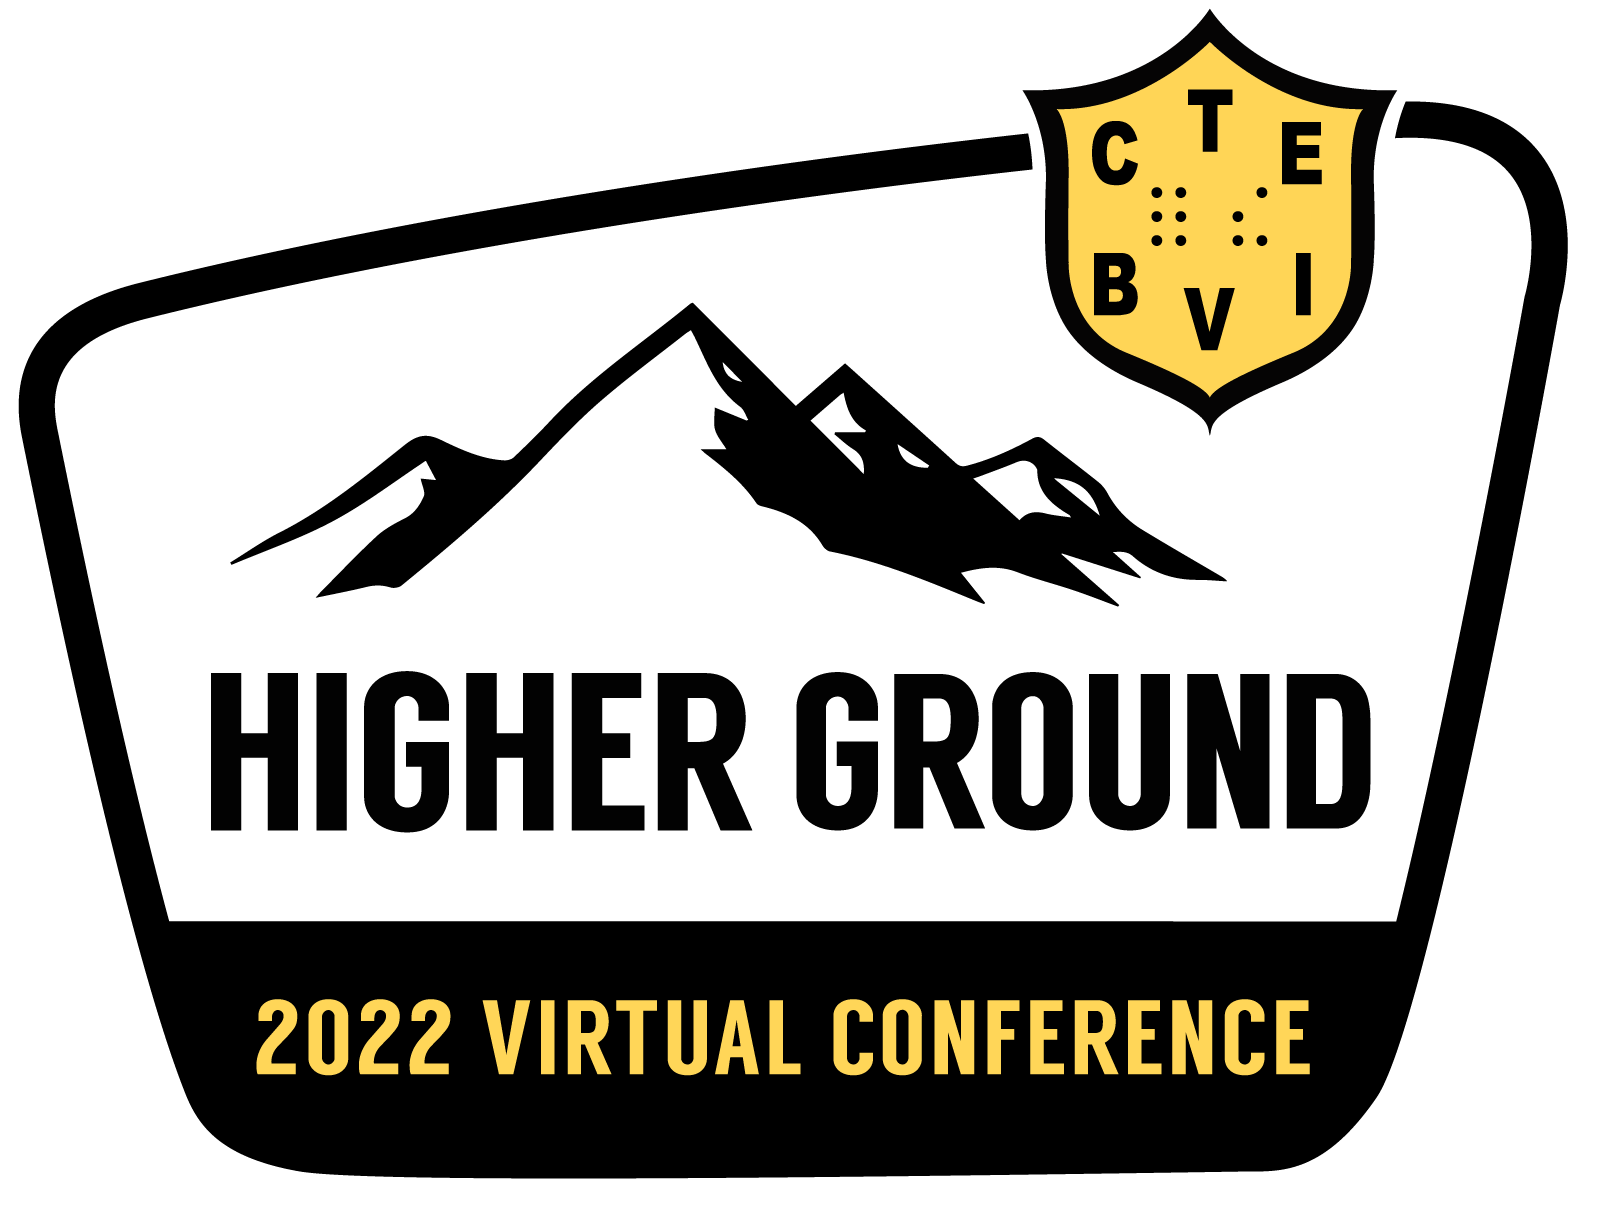 The CTEBVI Higher Ground 2022 Virtual Conference logo. An illustration of a mountain range with the words Higher Ground, and the CTEBVI shield in the upper right corner.